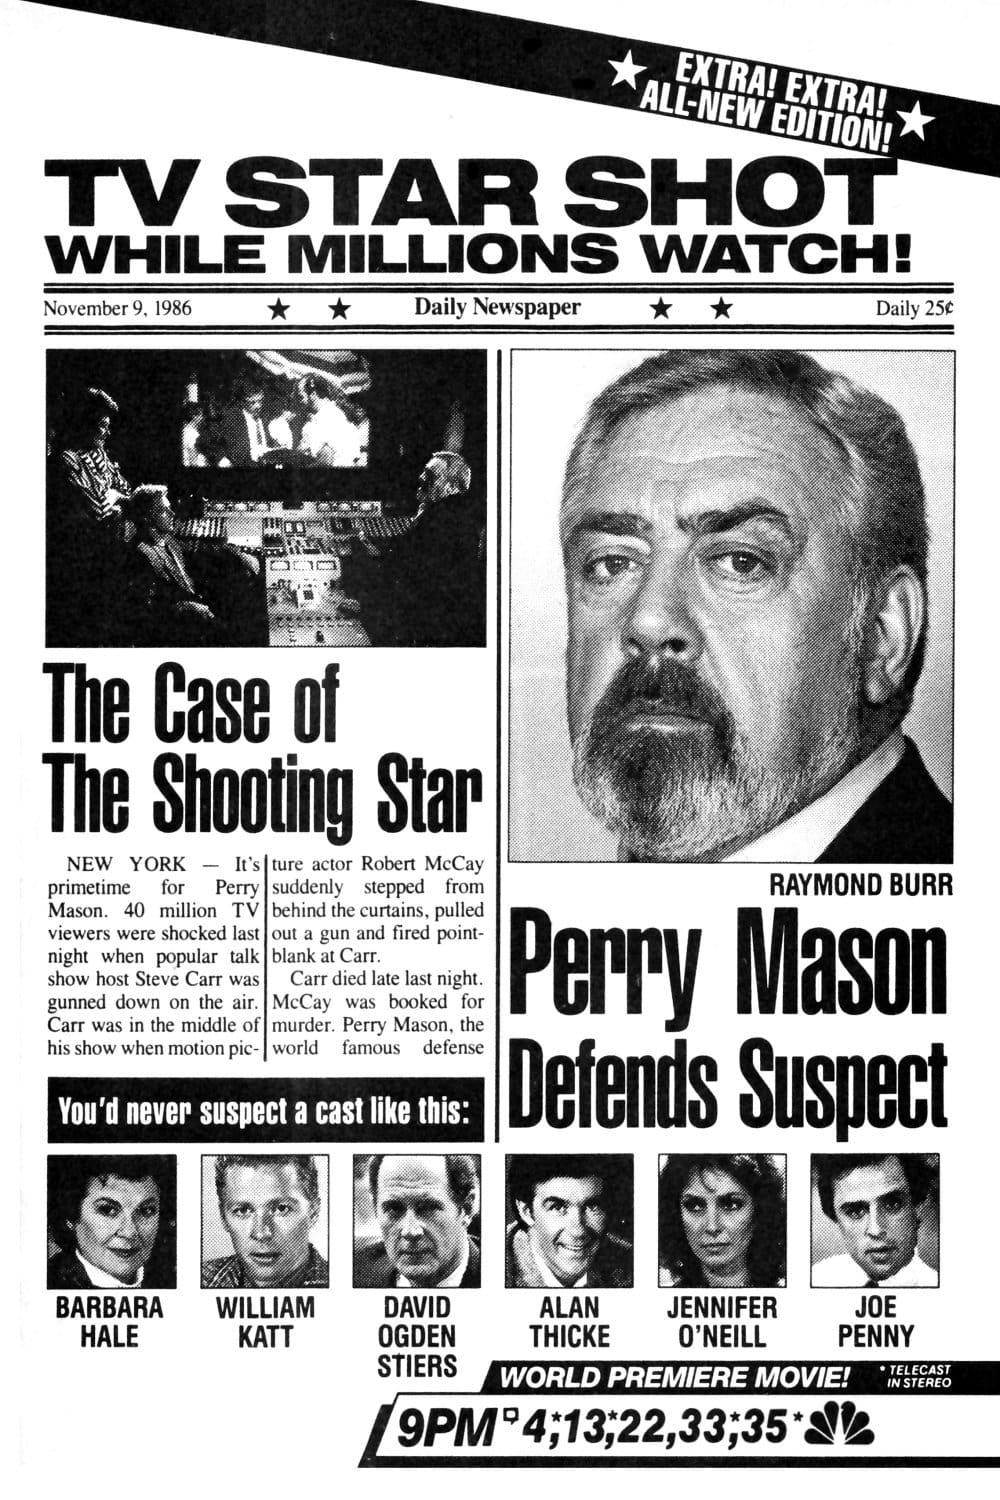 Perry Mason: The Case of the Shooting Star poster